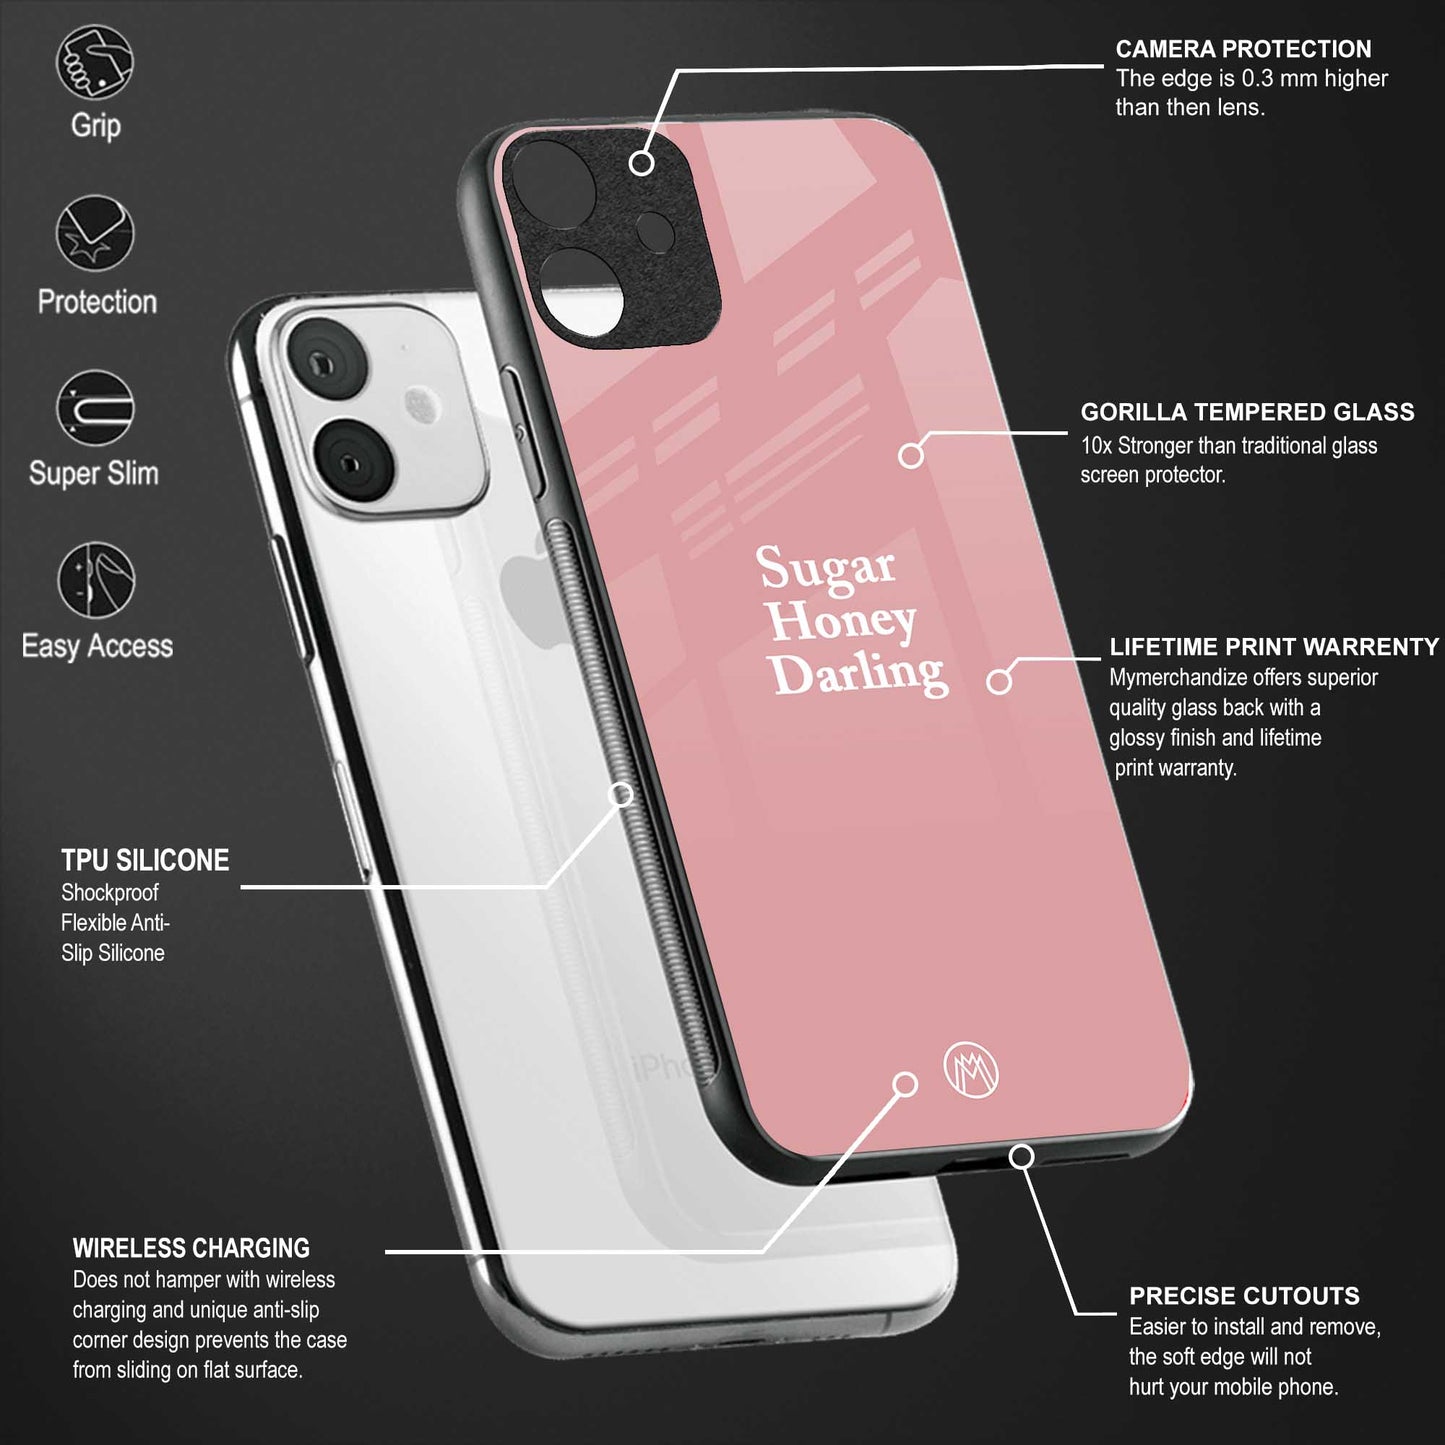 suger honey darling glass case for oneplus 7 pro image-4